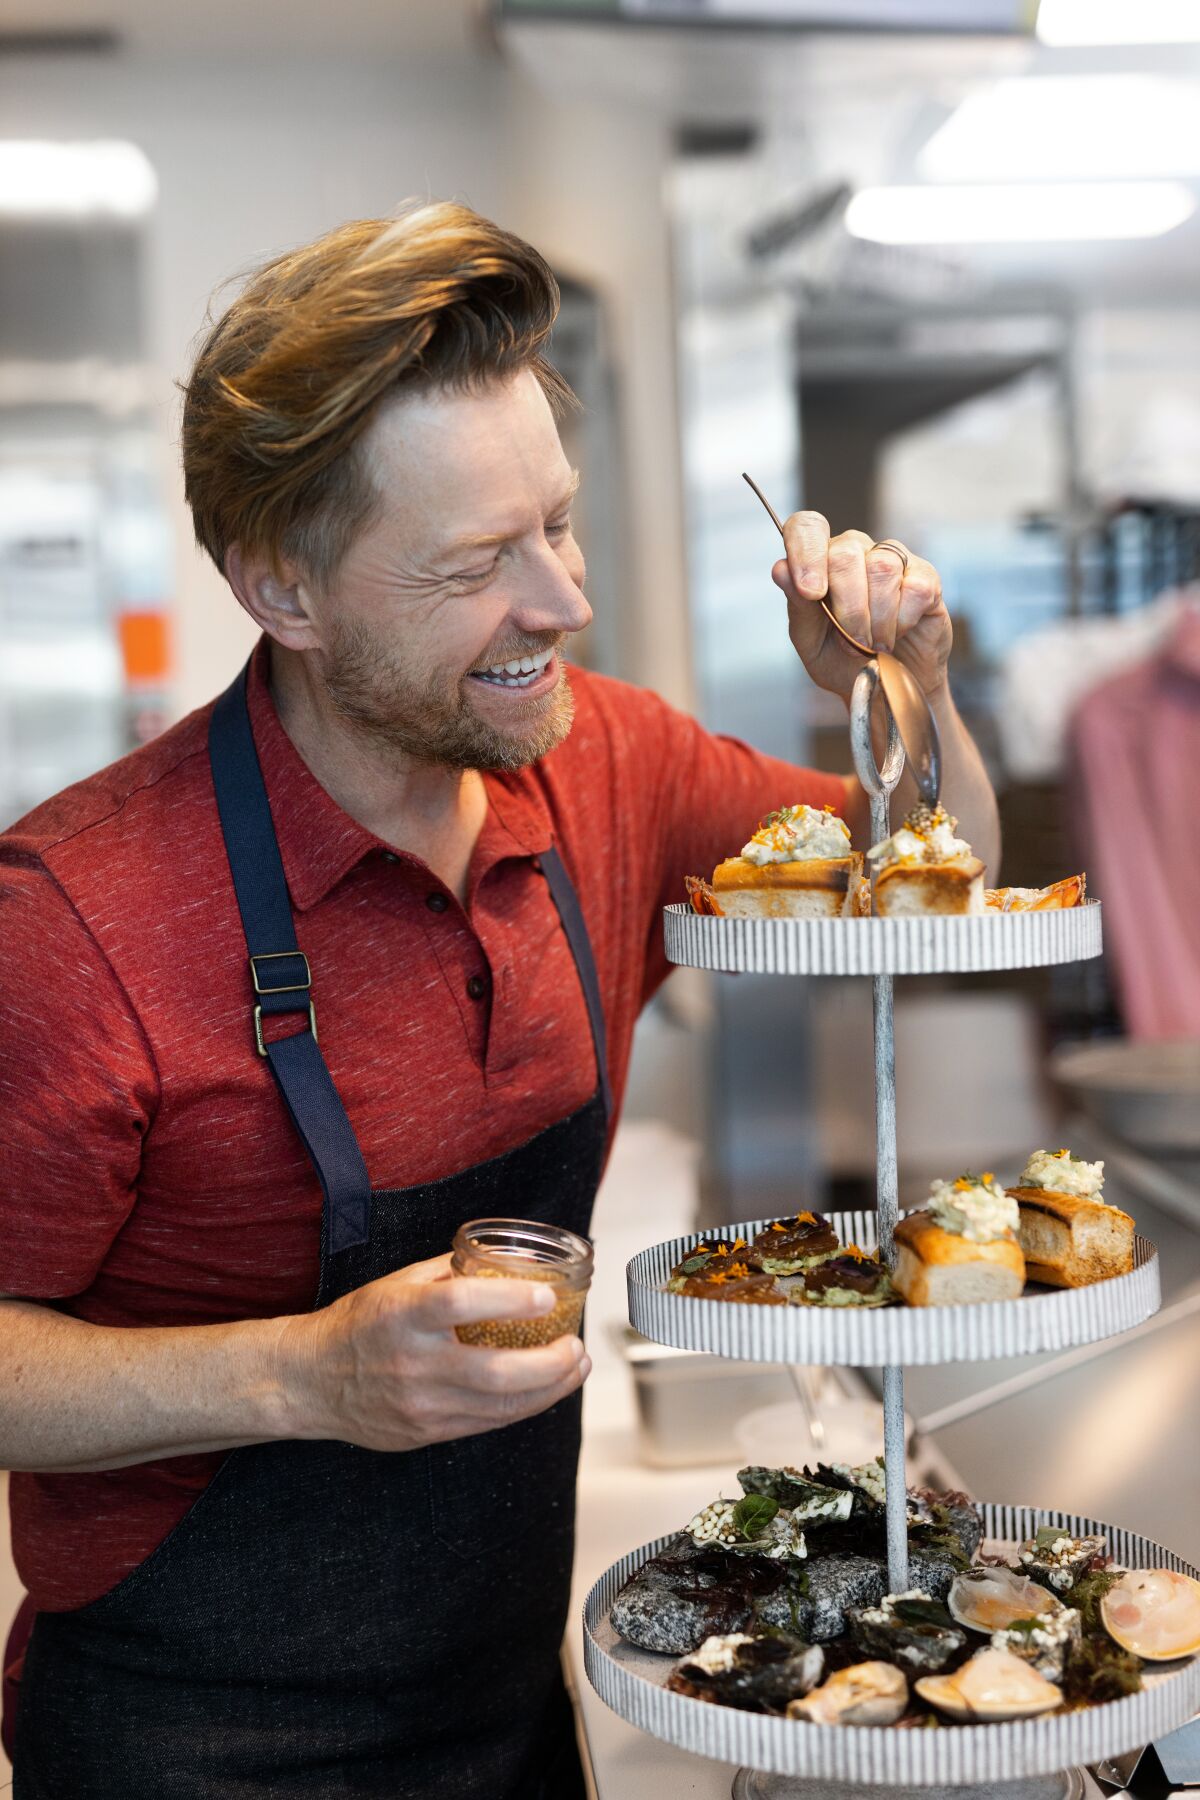 Chef Richard Blais puts the finishing touches on his  Plateau de Payare at his Blais by the Bay restaurant at the Rady Shell.